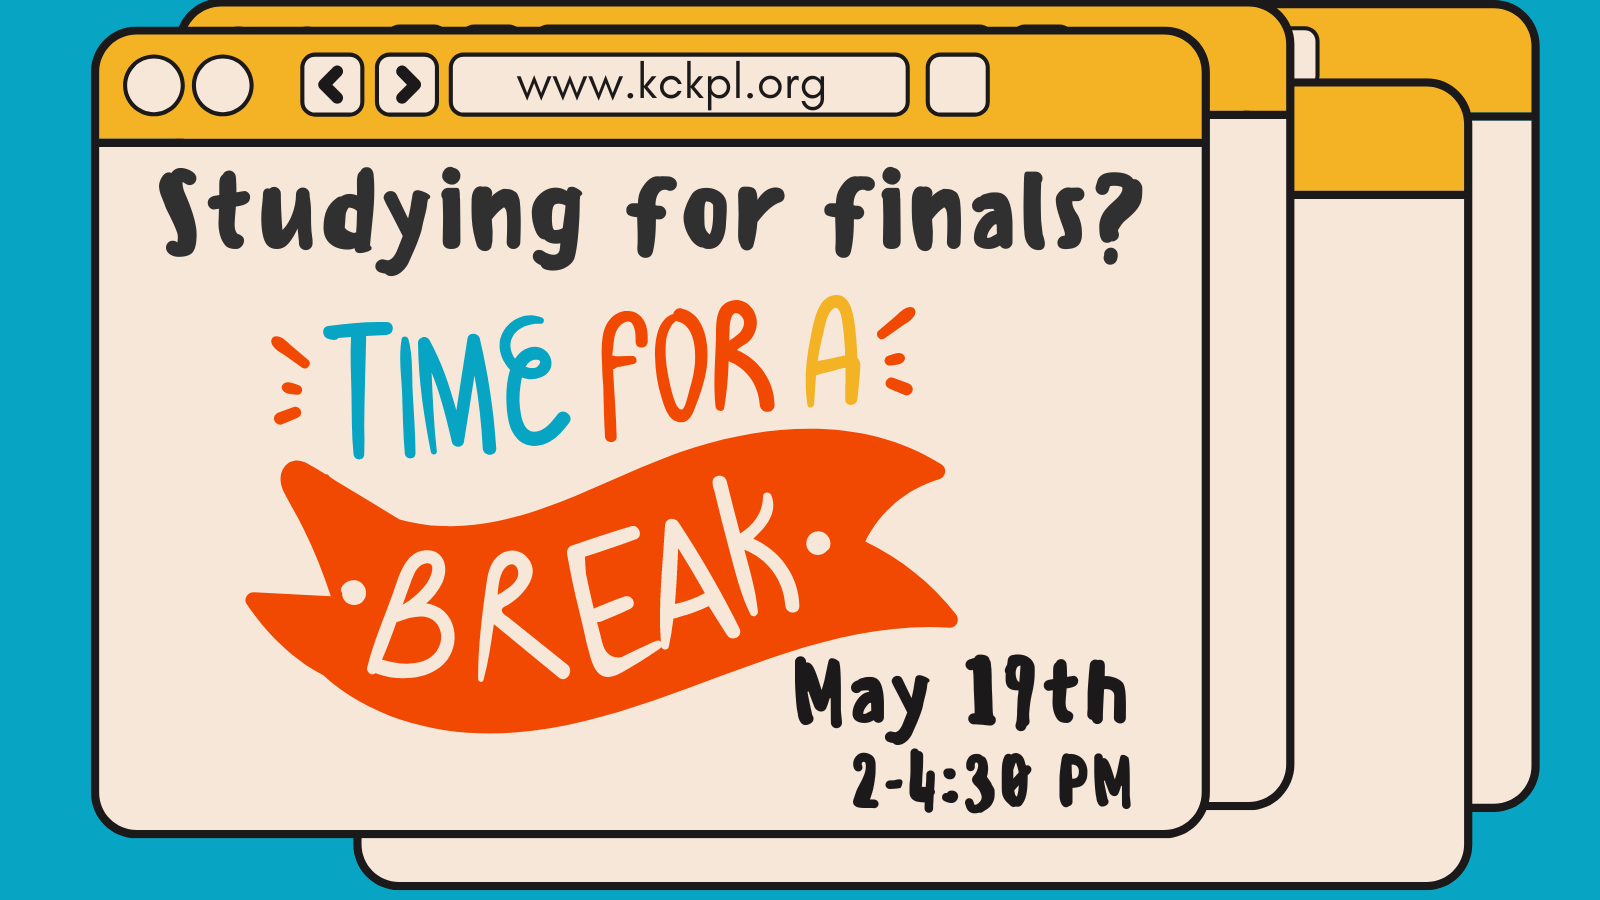 A screen with multiple tabs open and the front most tab says "Studying for finals? Time for a Break! May 19th 2 to 4:30 pm"